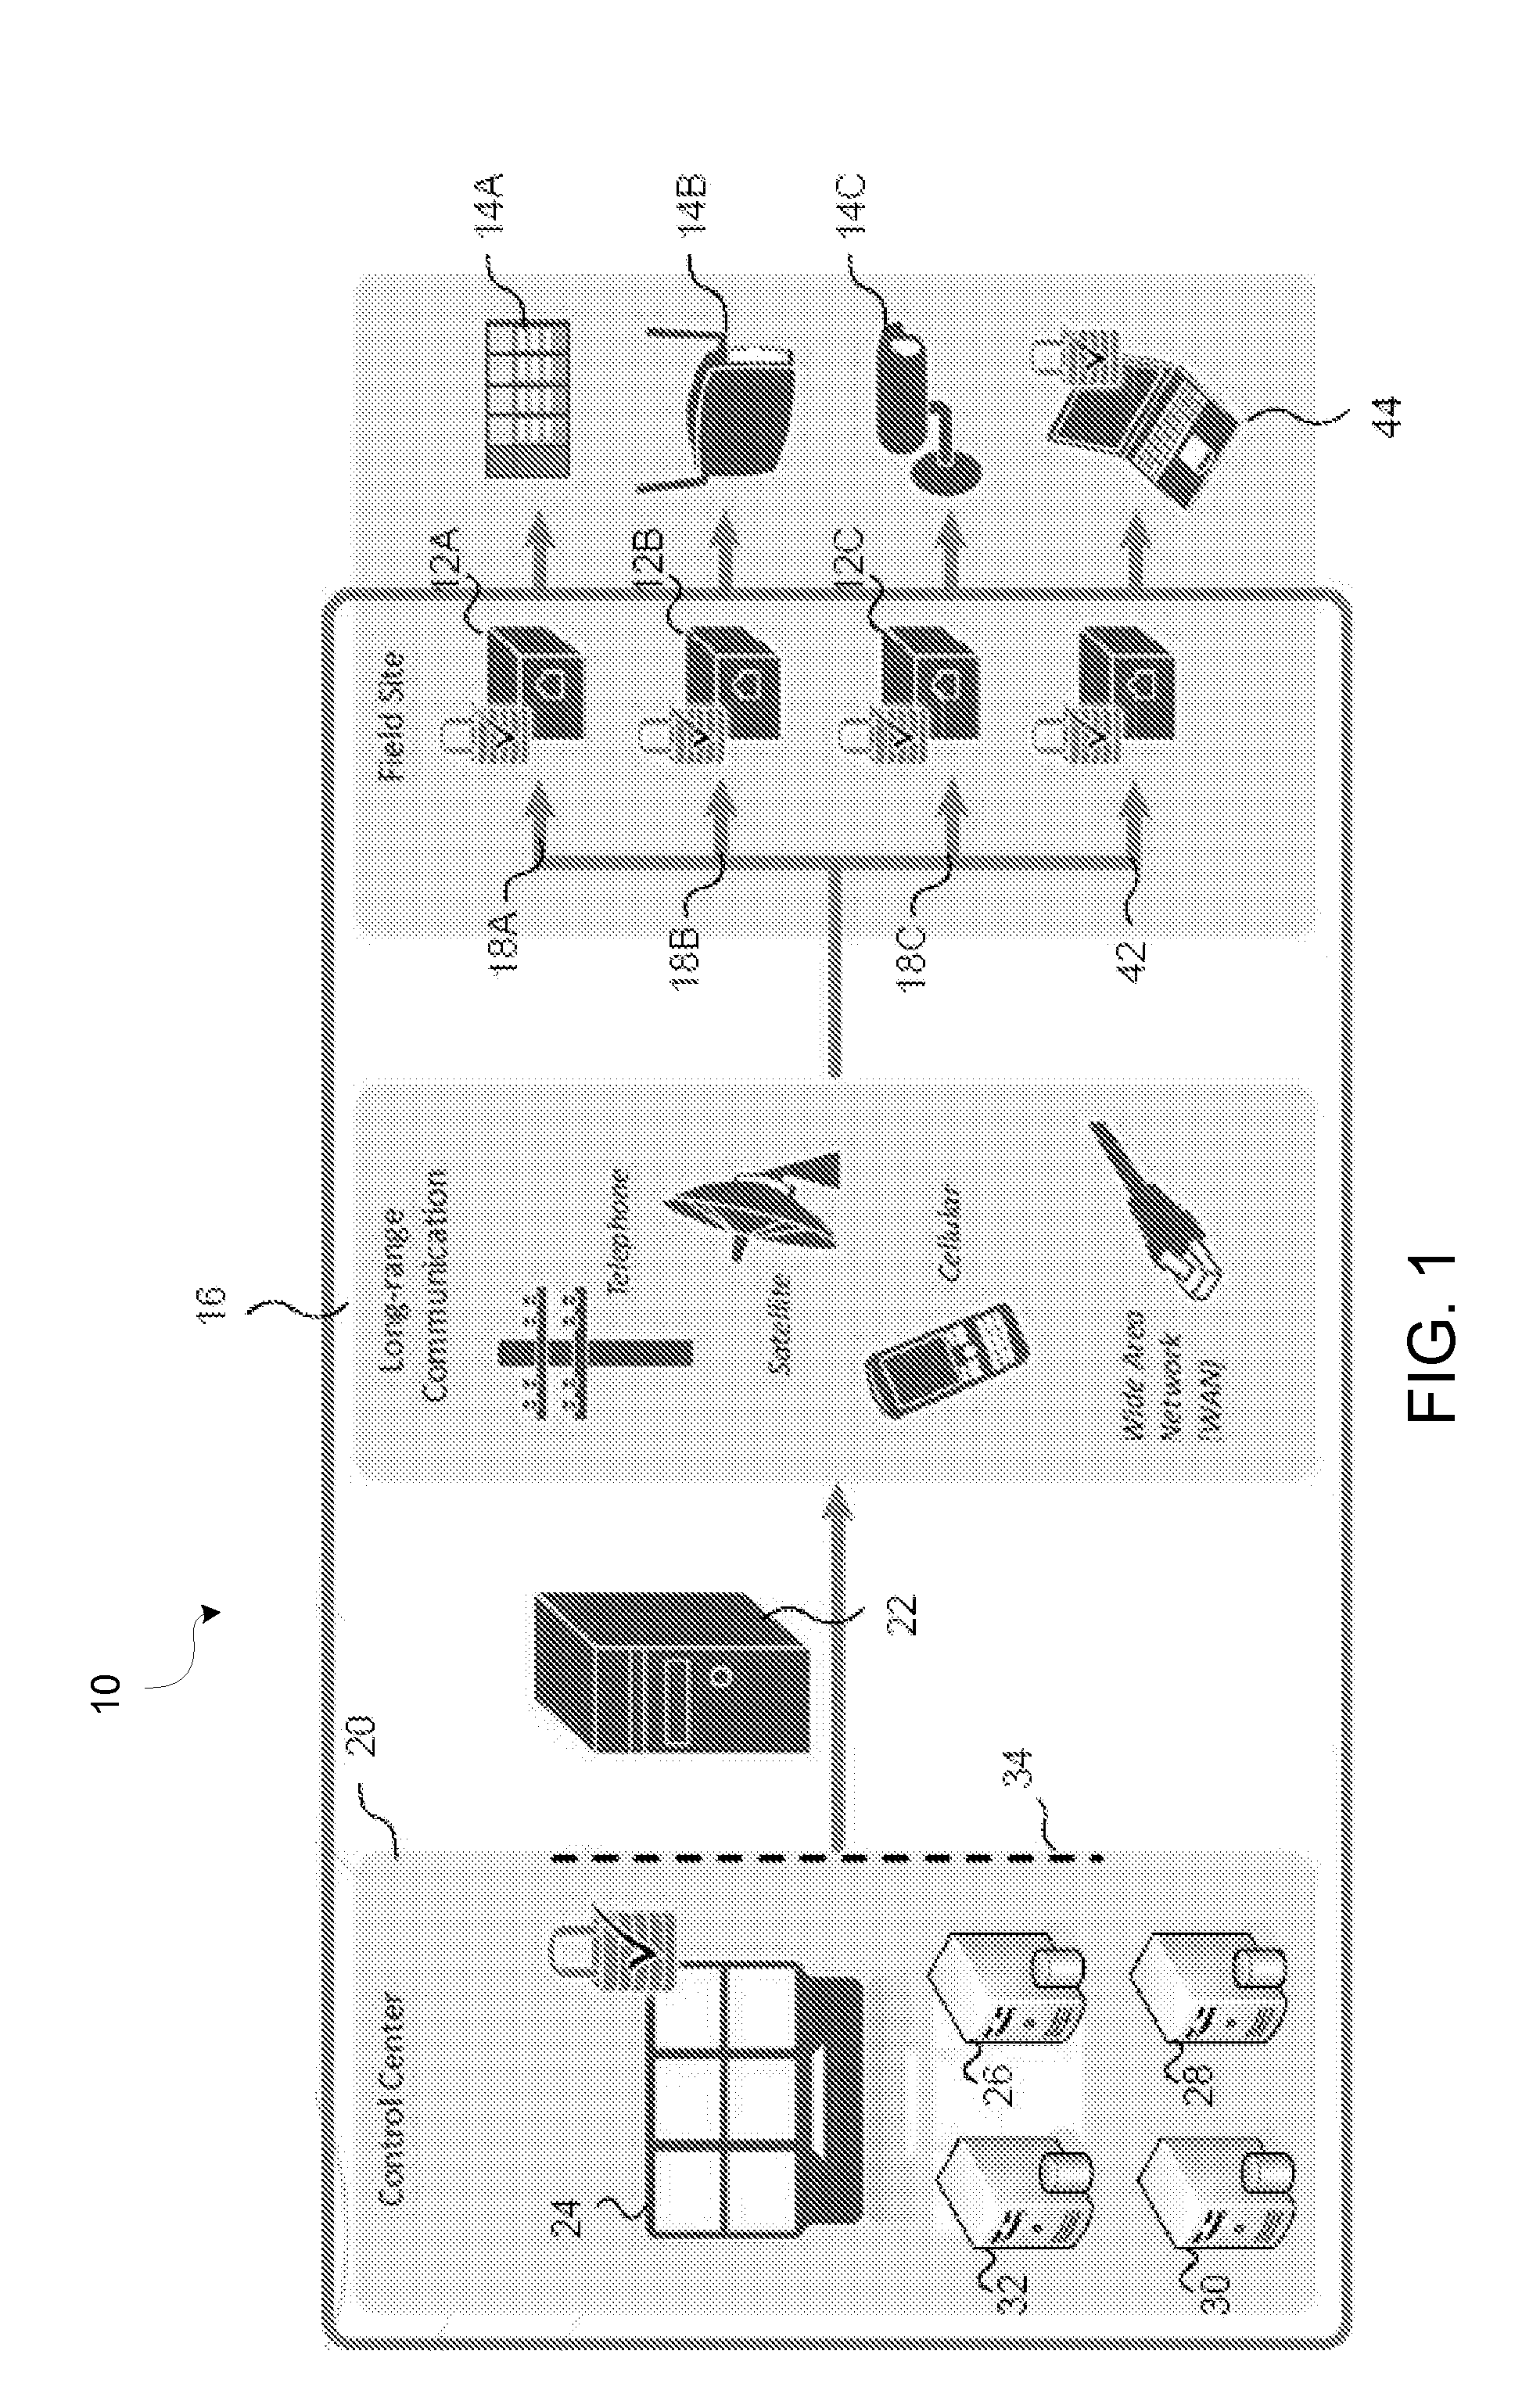 System and Method for Secured Communications by Embedded Platforms